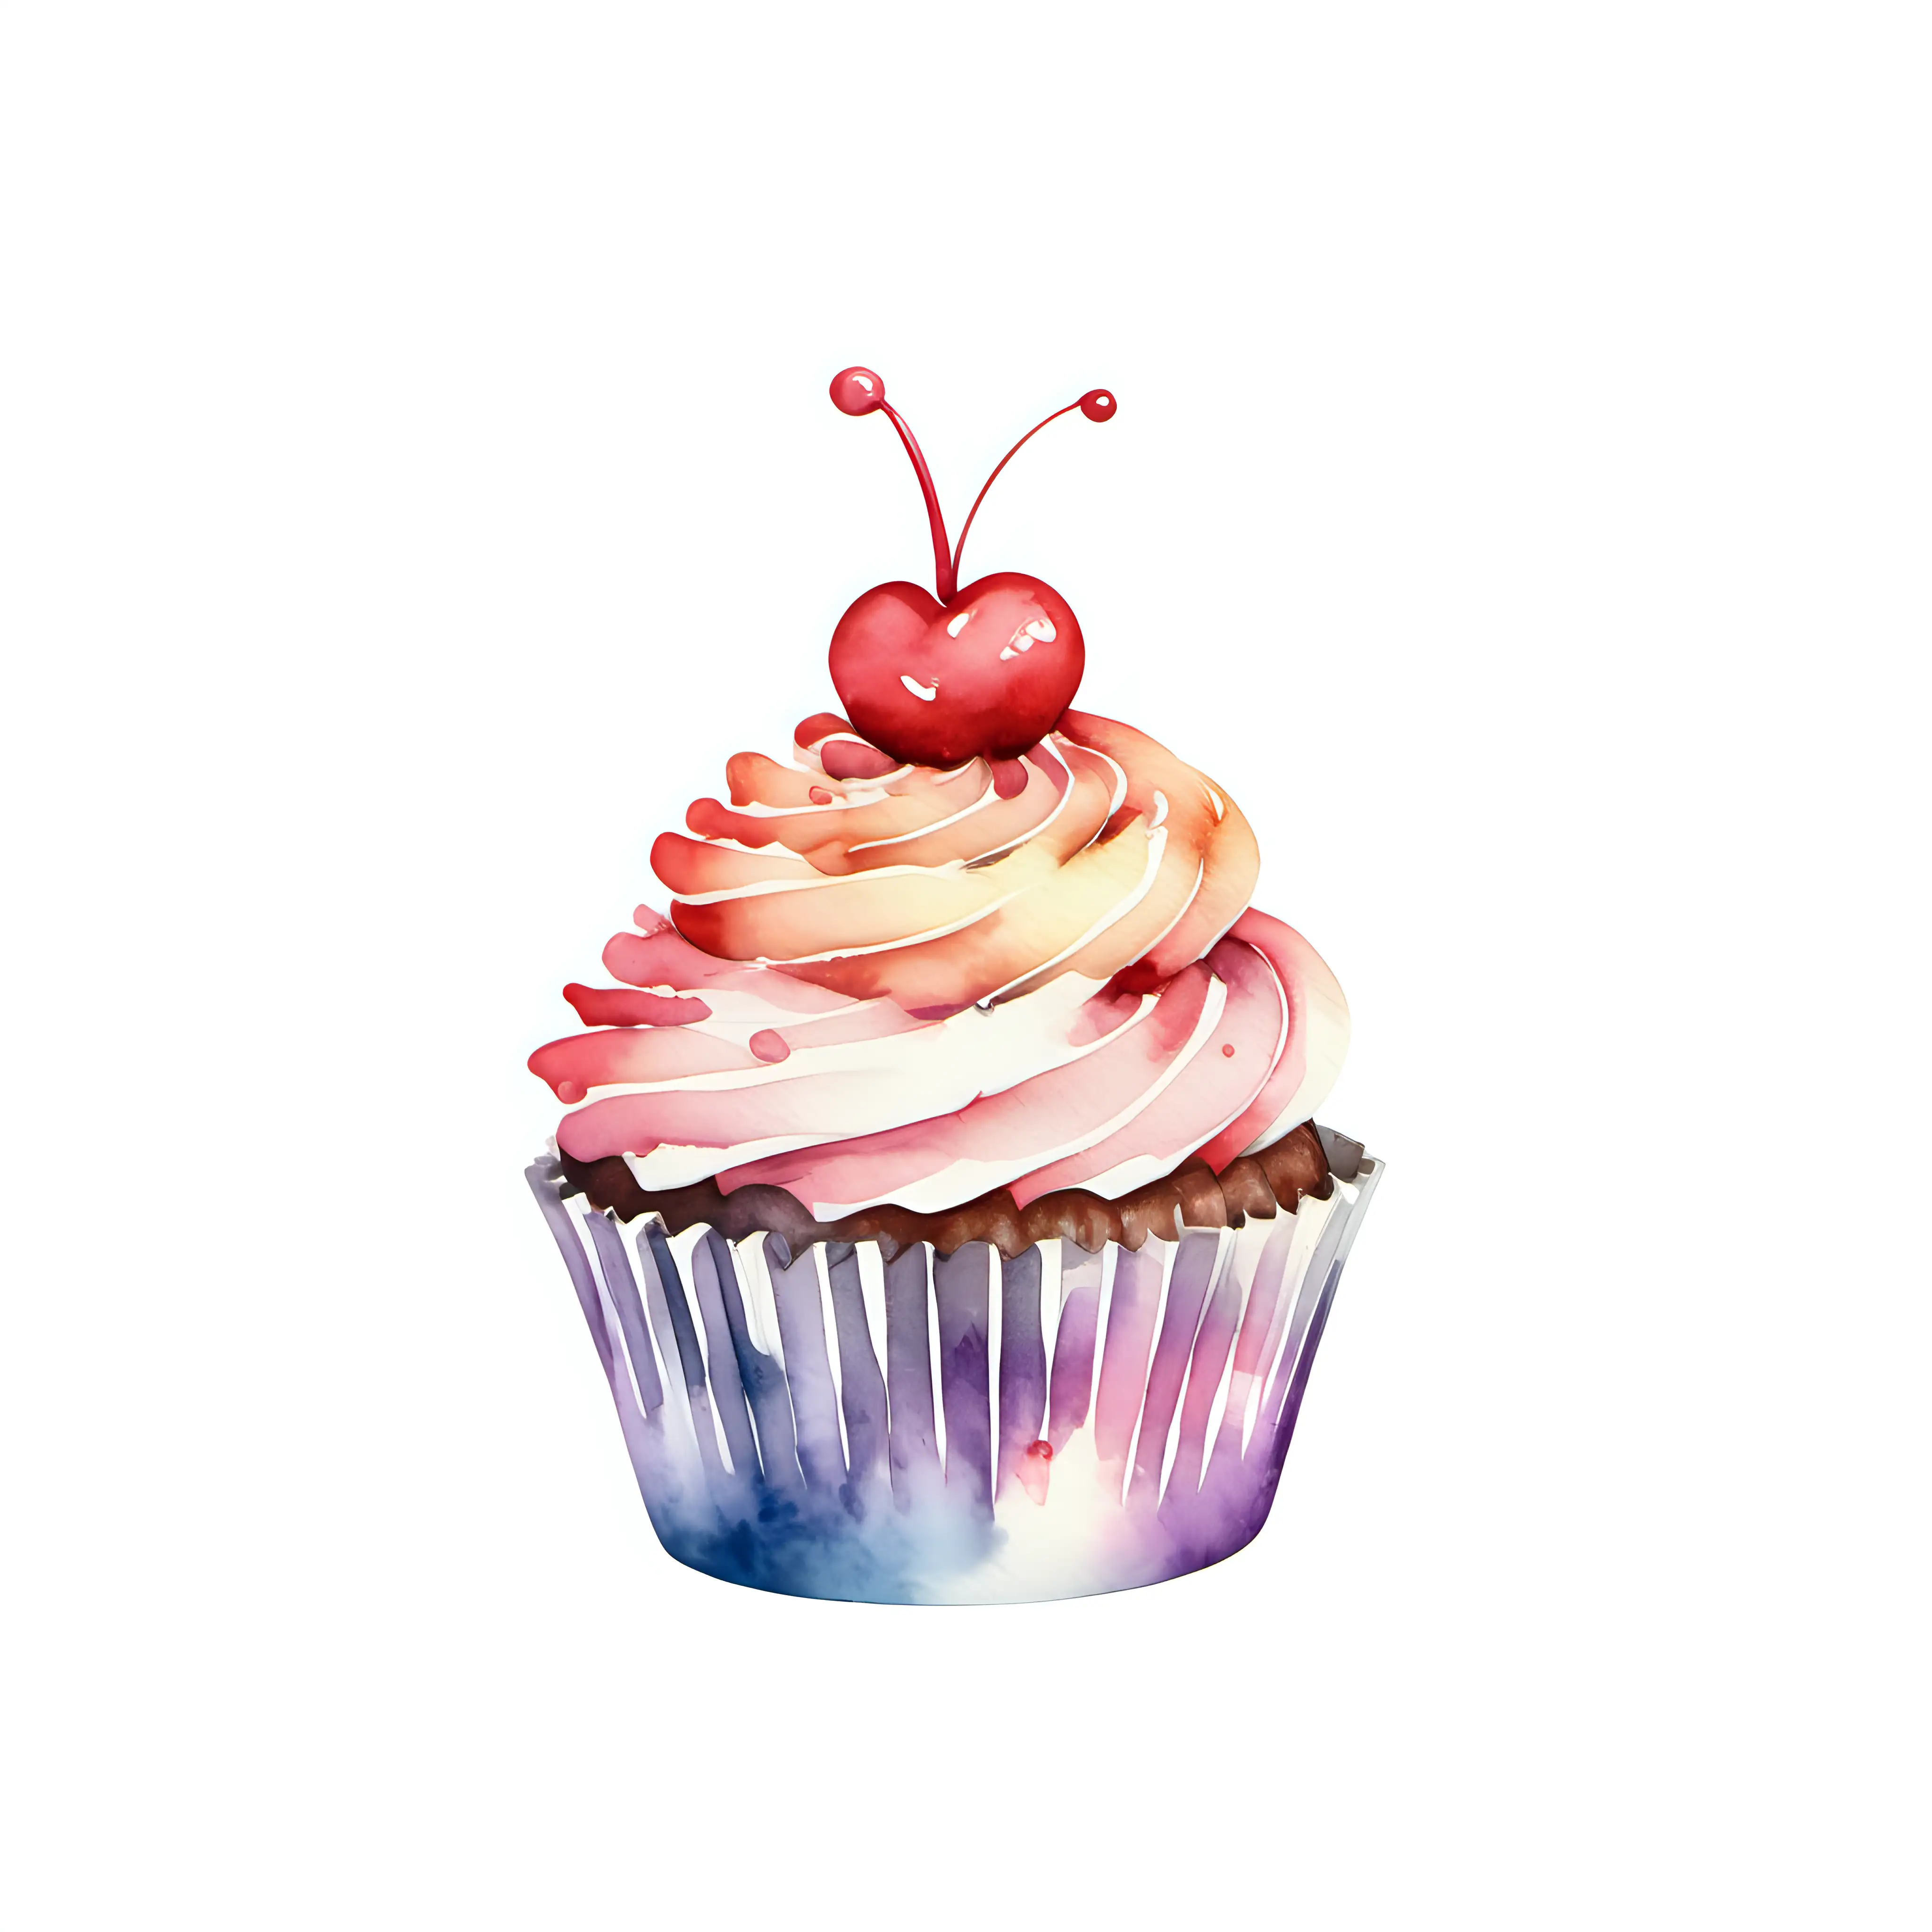 Watercolor styled, single cupcake with no background
